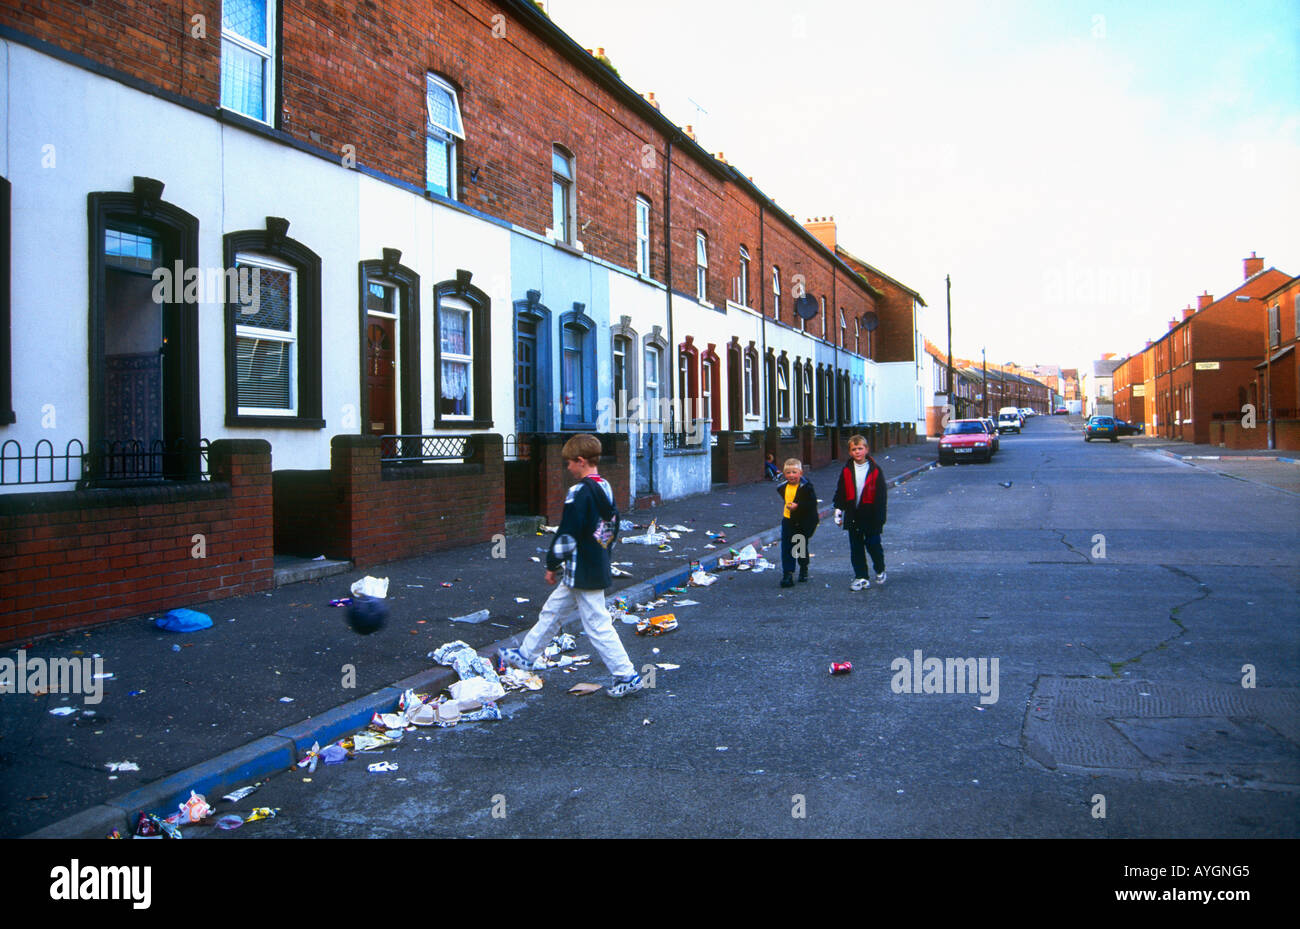 Street kids playing in the Shankhill road precinct of West Belfast Northern Ireland Stock Photo